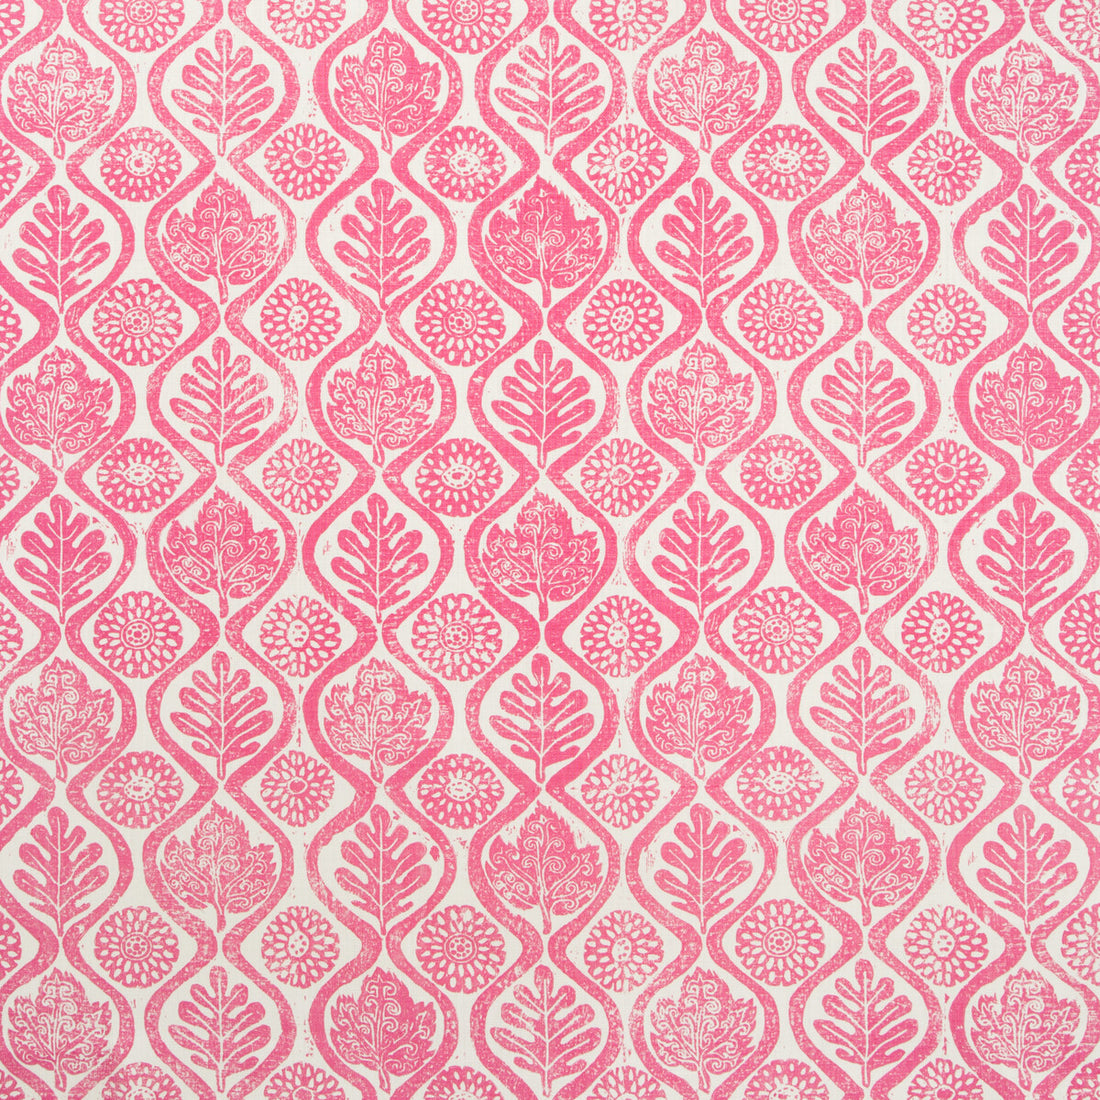 Oakleaves fabric in fuschia color - pattern BFC-3514.7.0 - by Lee Jofa in the Blithfield collection